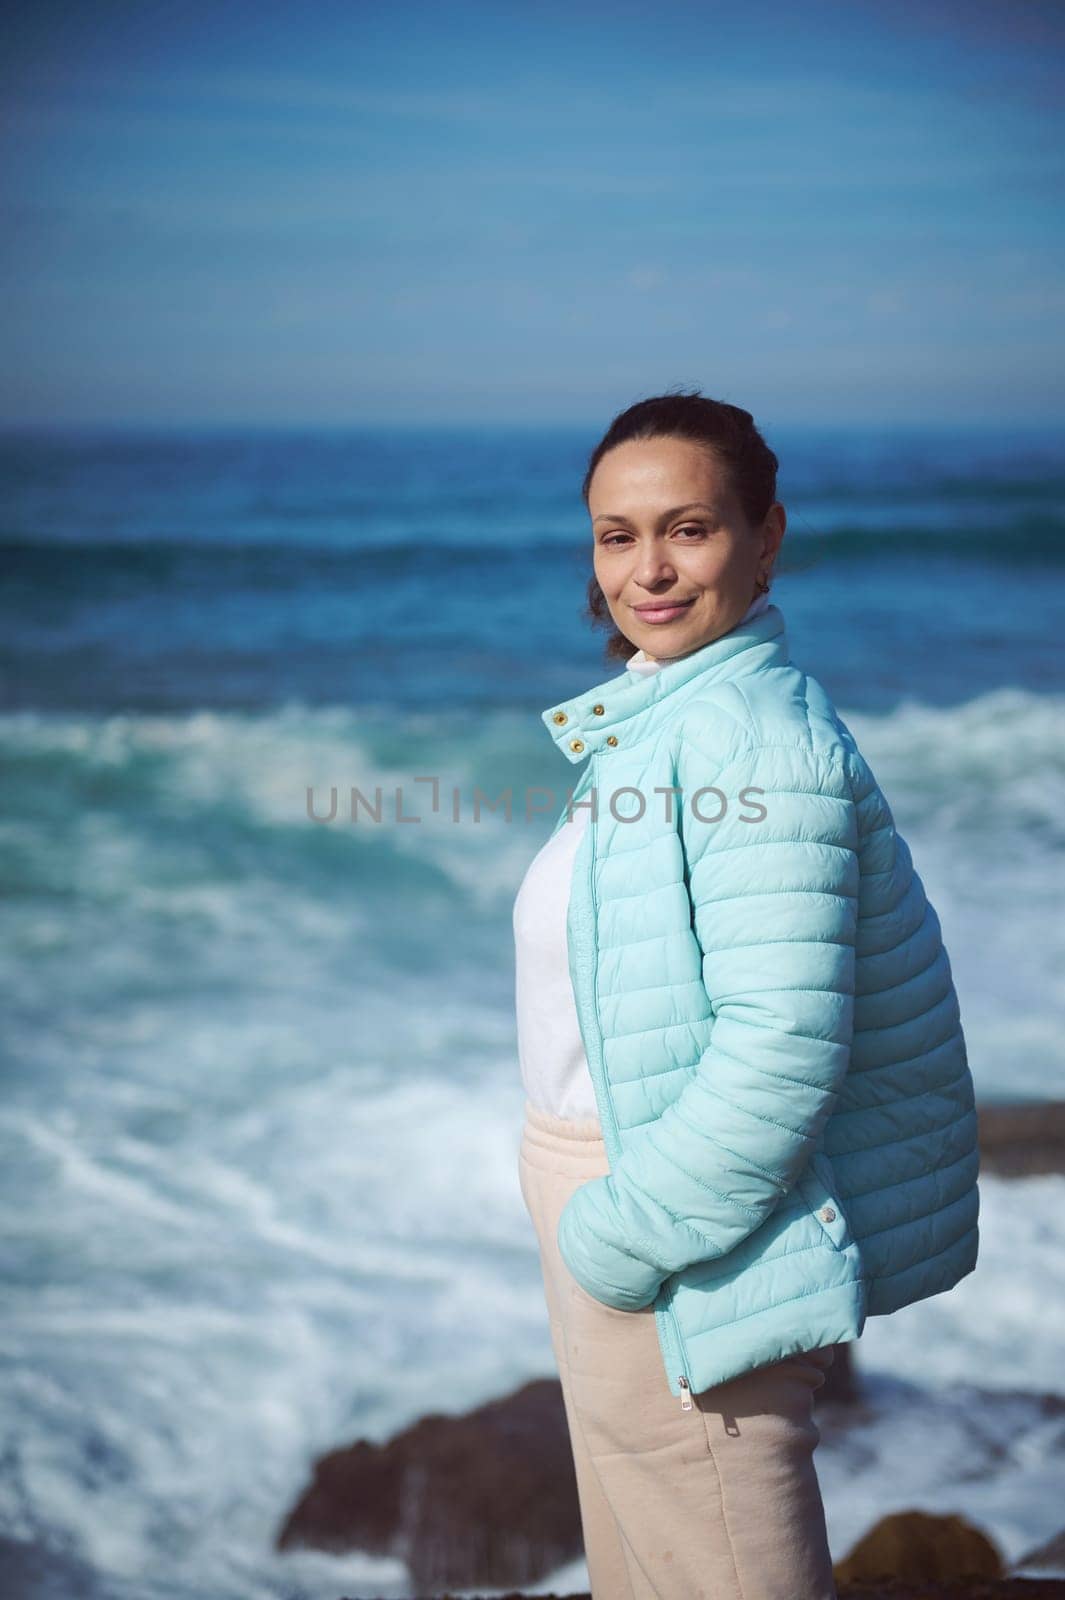 Waist up portrait of a happy smiling woman standing by ocean on the rocky cliff, looking at camera, enjoying the view of beautiful waves making white foam while crushing on the headland